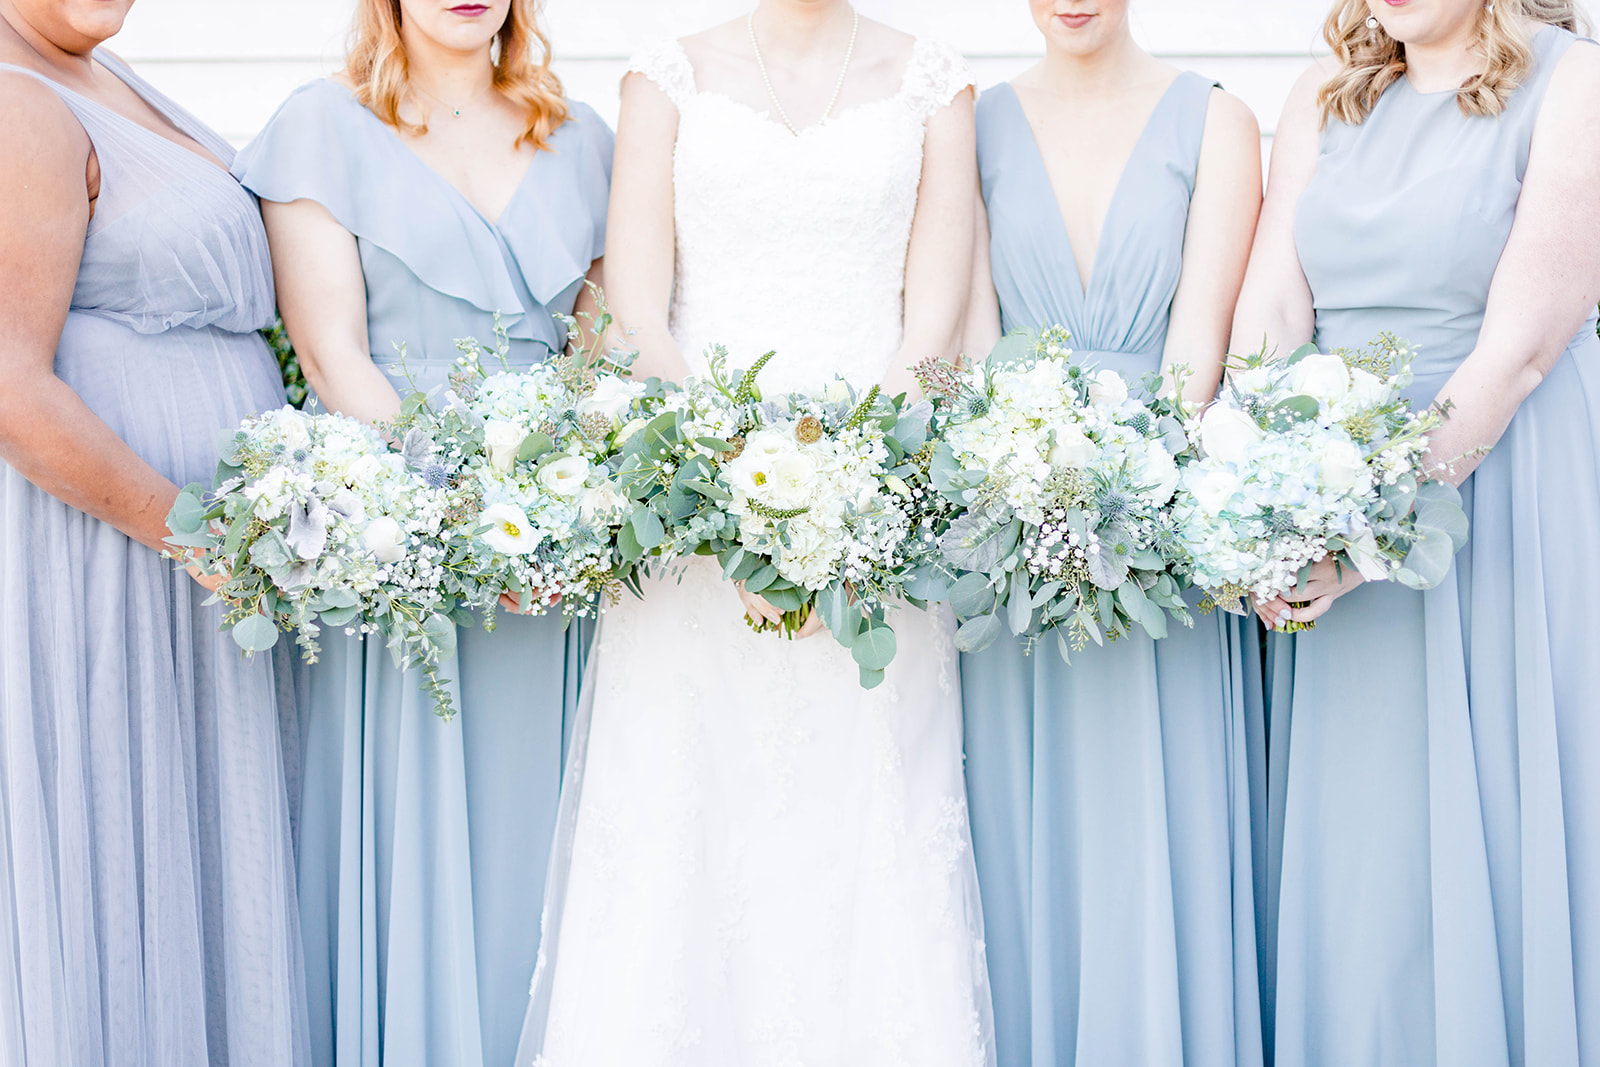 dusty blue bridesmaid dresses with white and sage bouquets. How to choose your bridesmaids and how to choose your maid of honor. Virginia wedding photographer Emily Nicole Photography